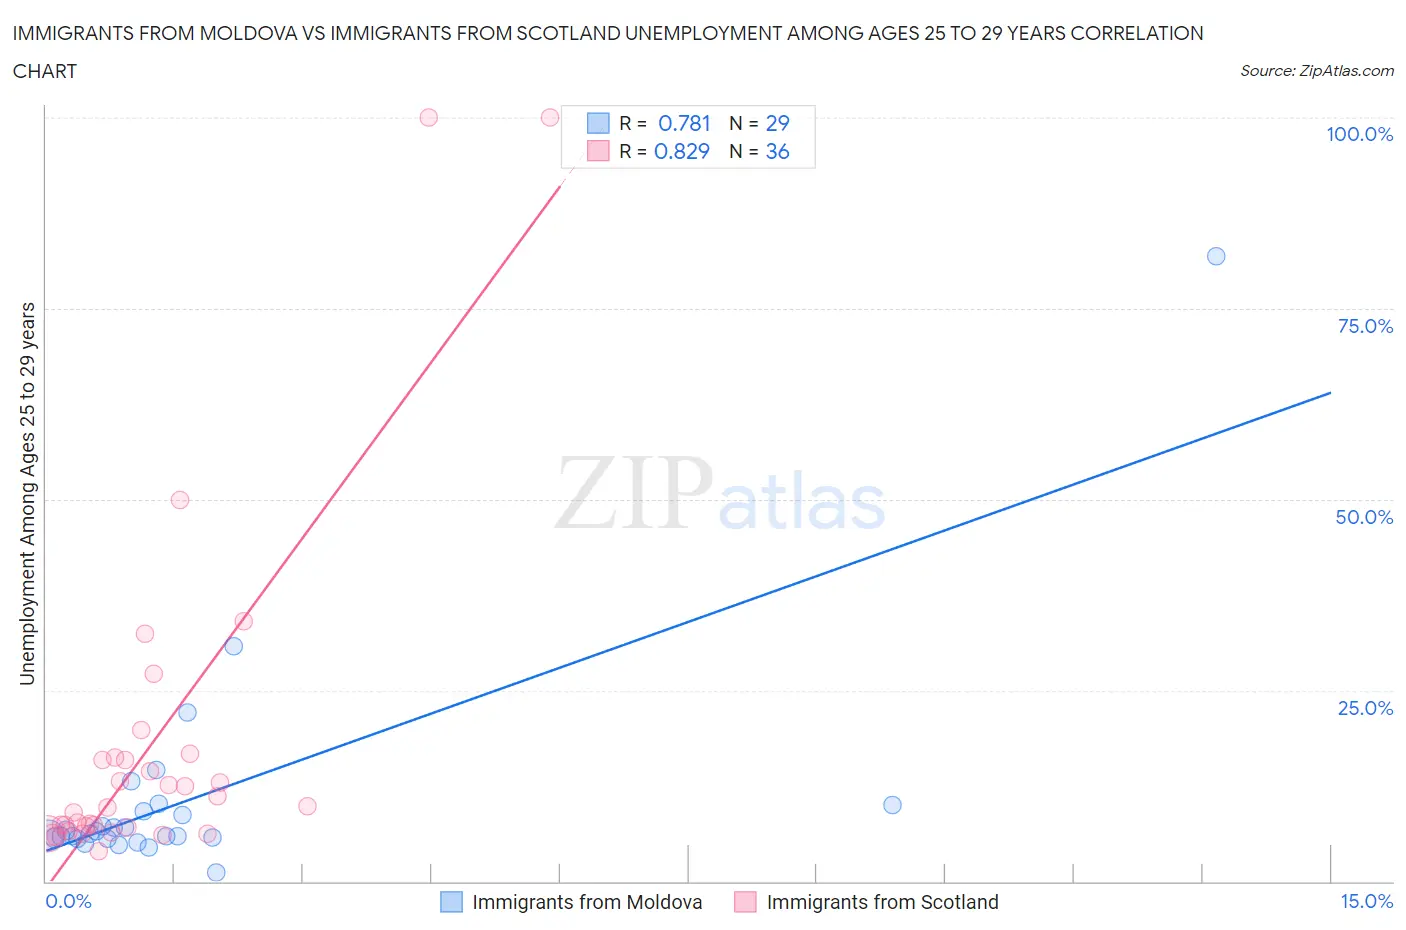 Immigrants from Moldova vs Immigrants from Scotland Unemployment Among Ages 25 to 29 years